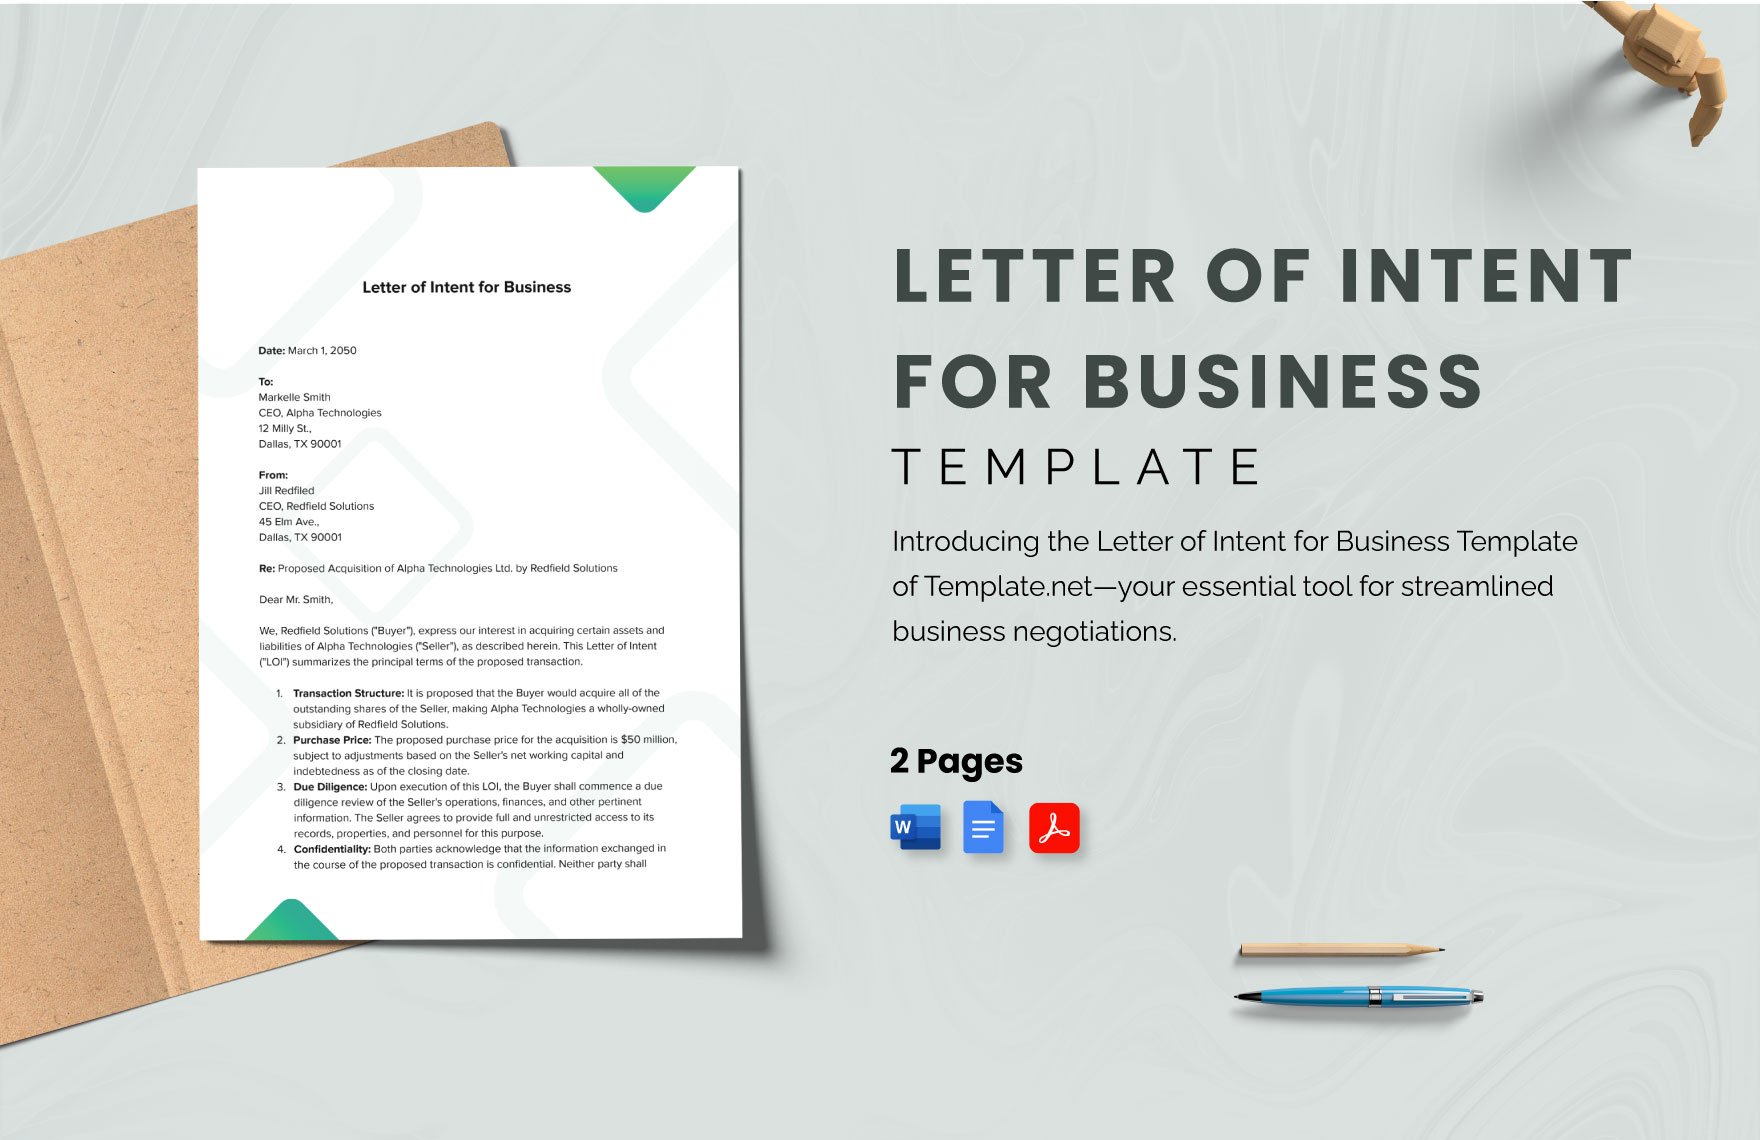 Letter of Intent for Business Template in Word, Google Docs, PDF